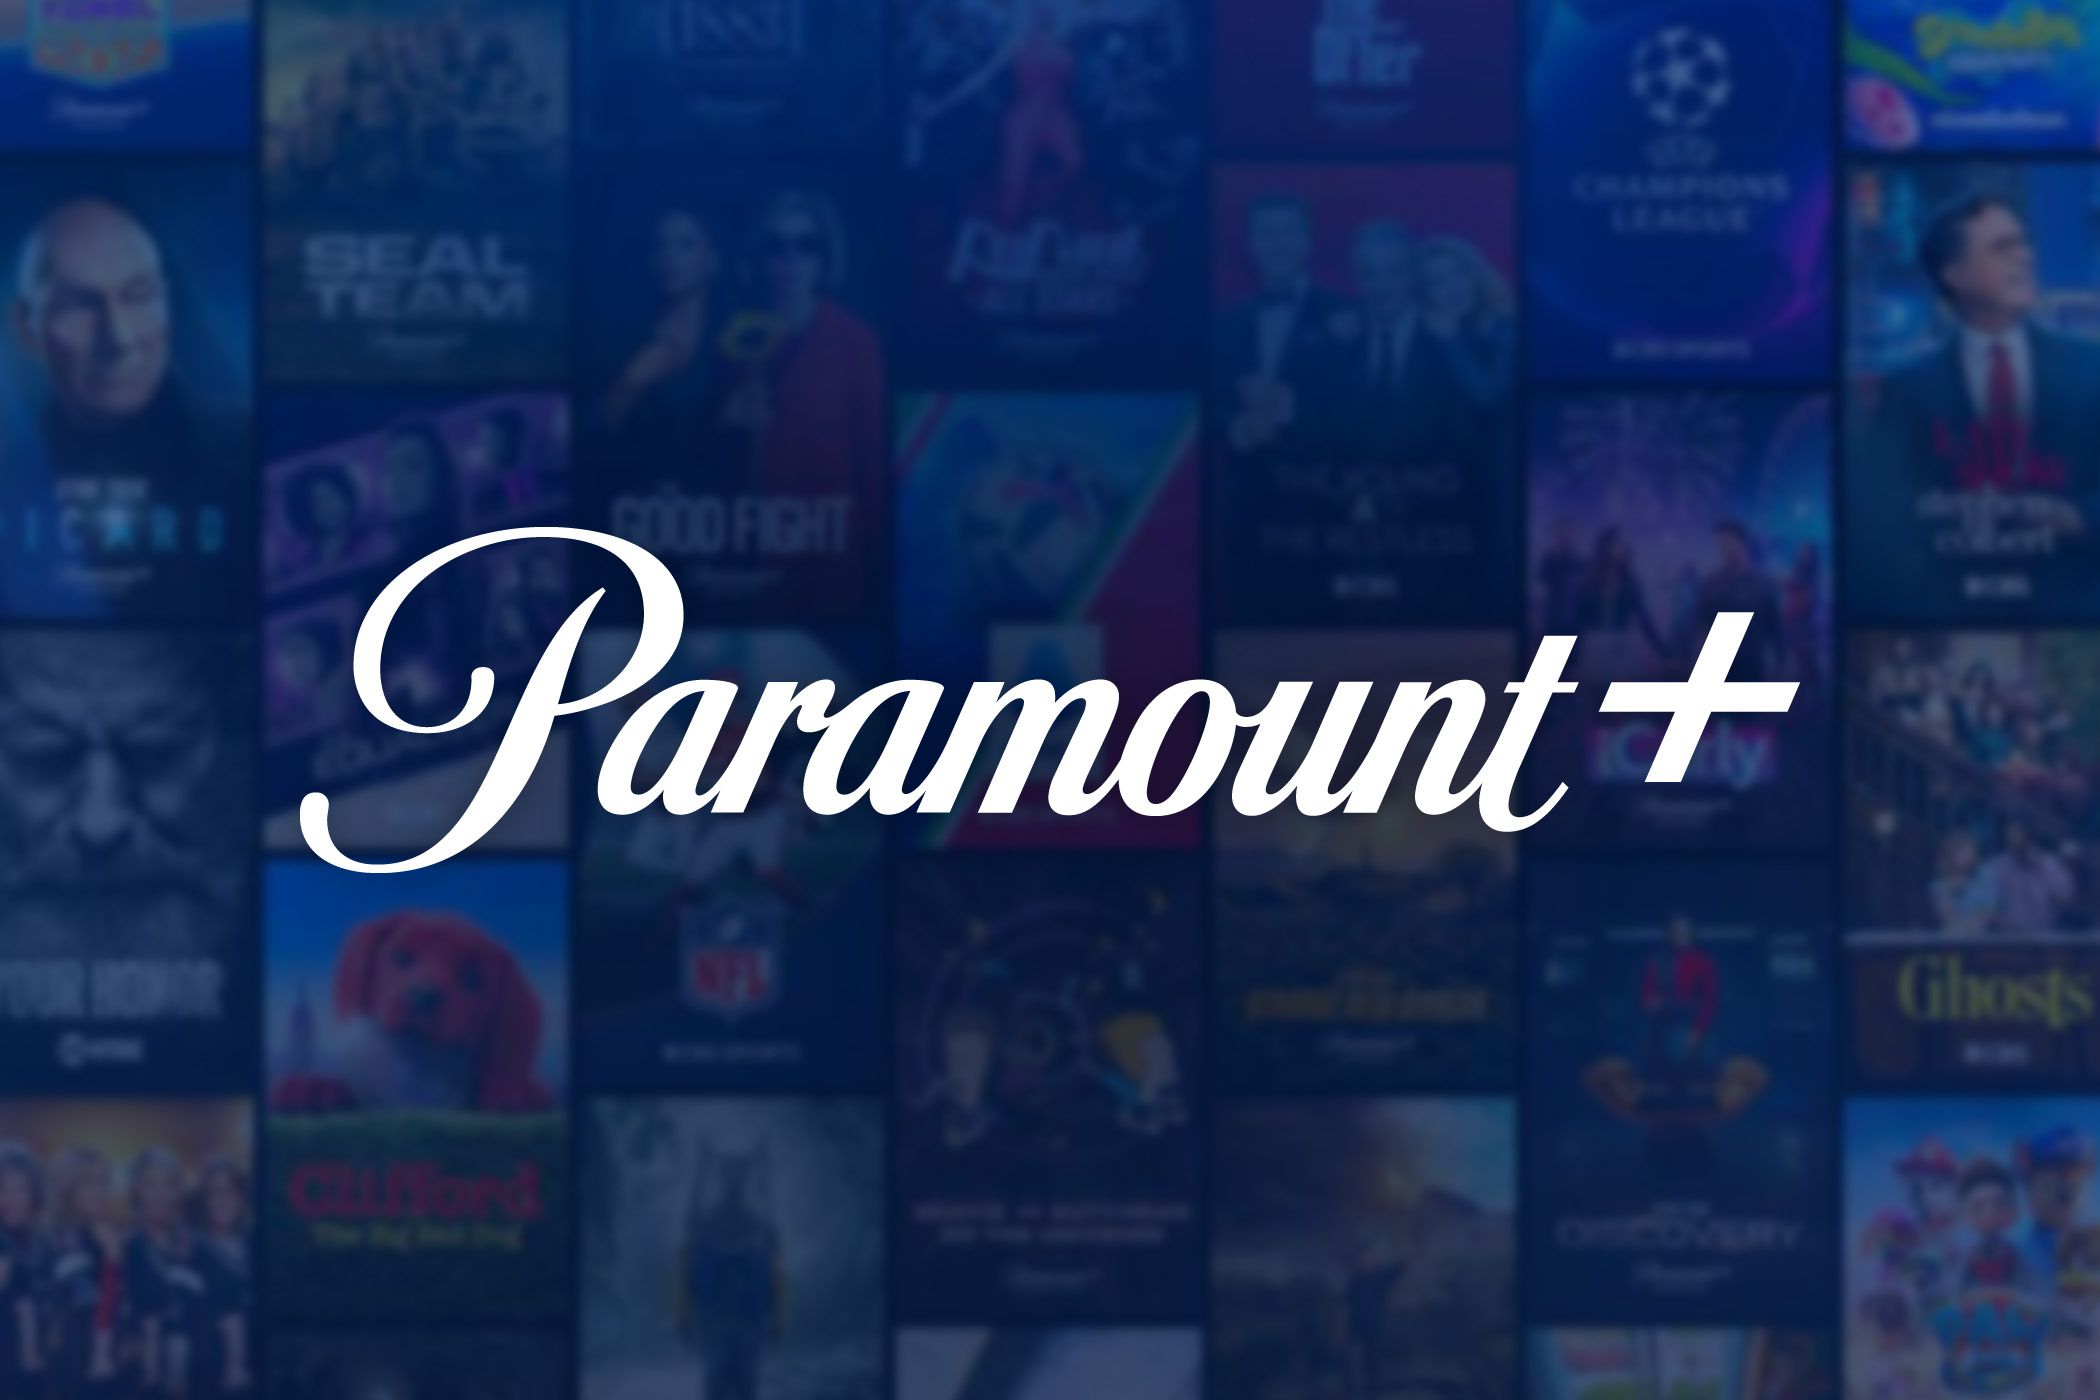 Get a Year of Paramount+ for Just $30 With This Coupon Code